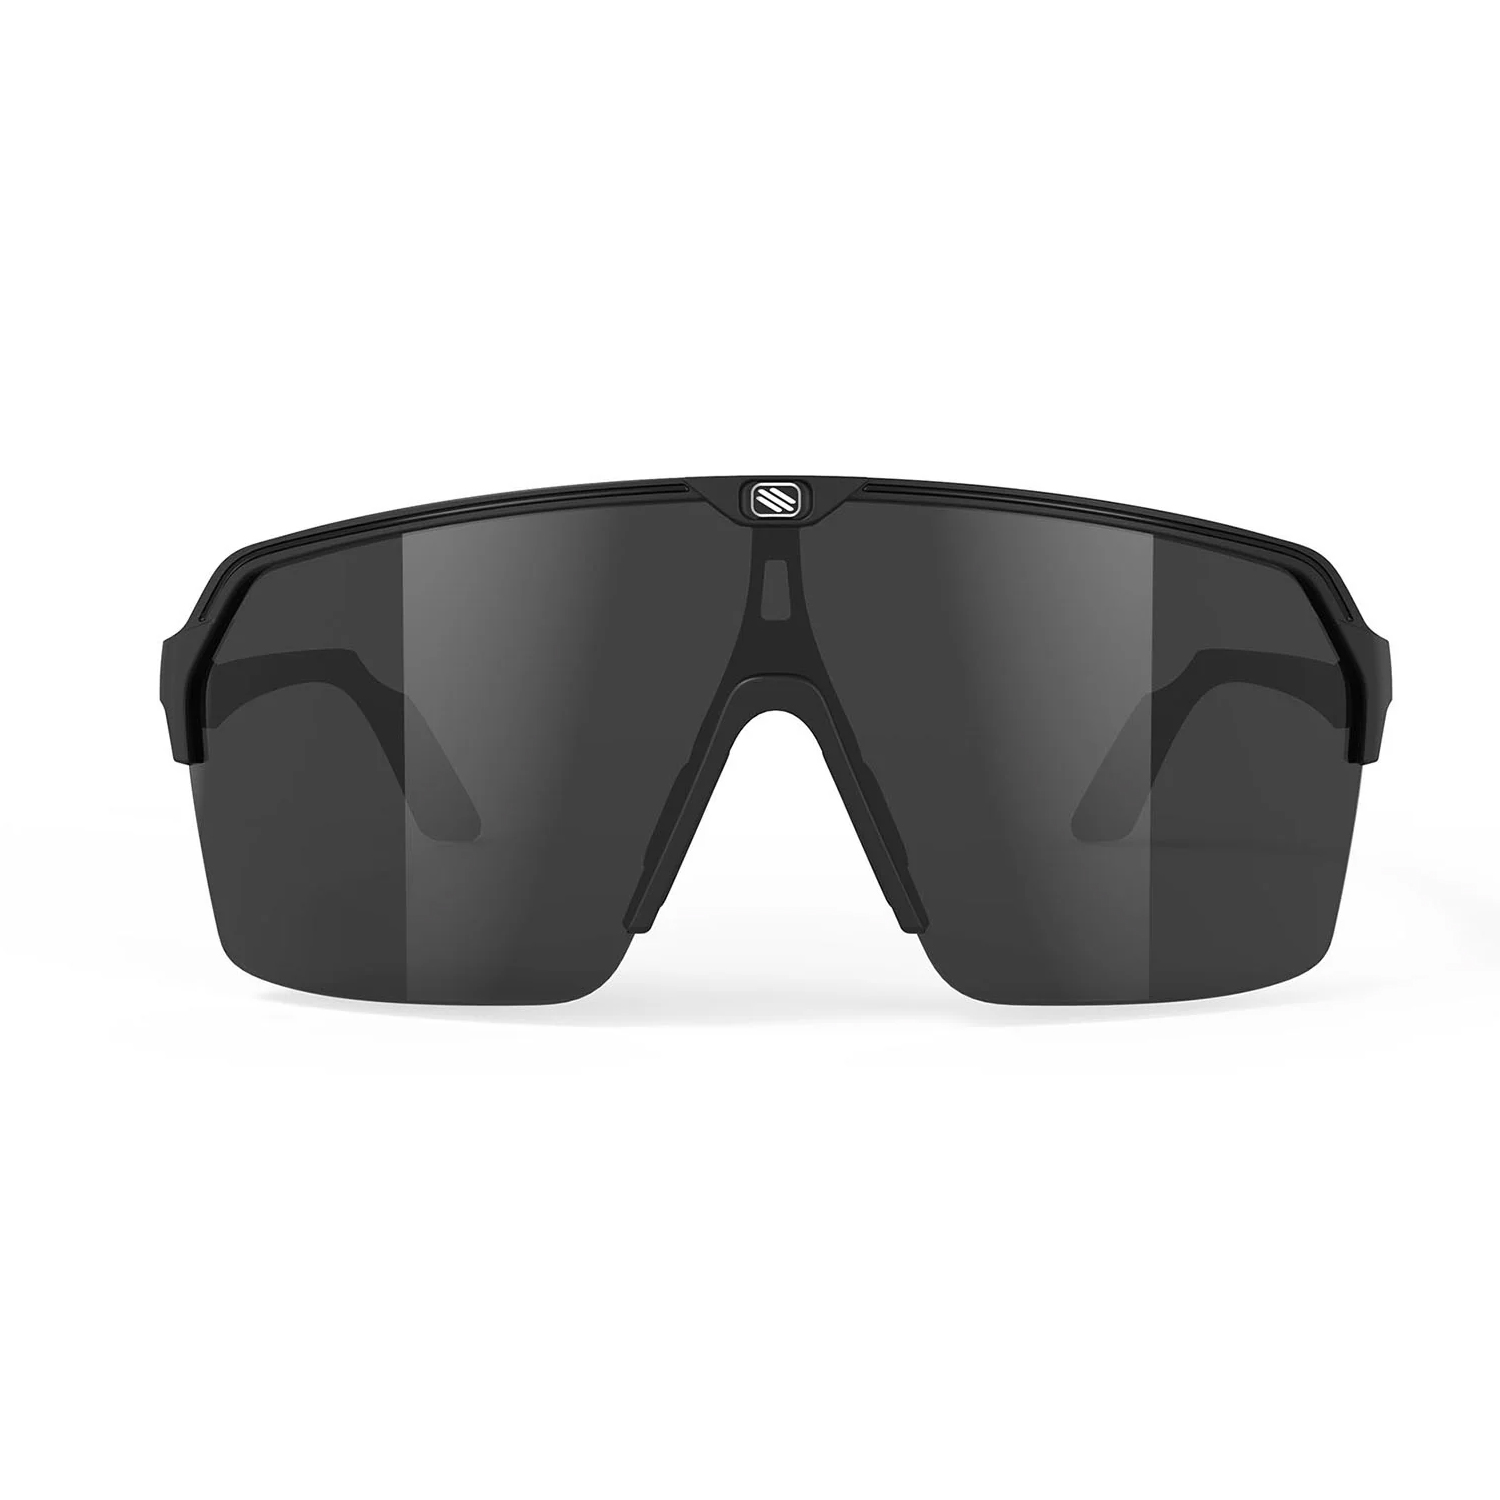 Rudy Project Spinshield Air Sunglasses Smoke Lens | Merlin Cycles